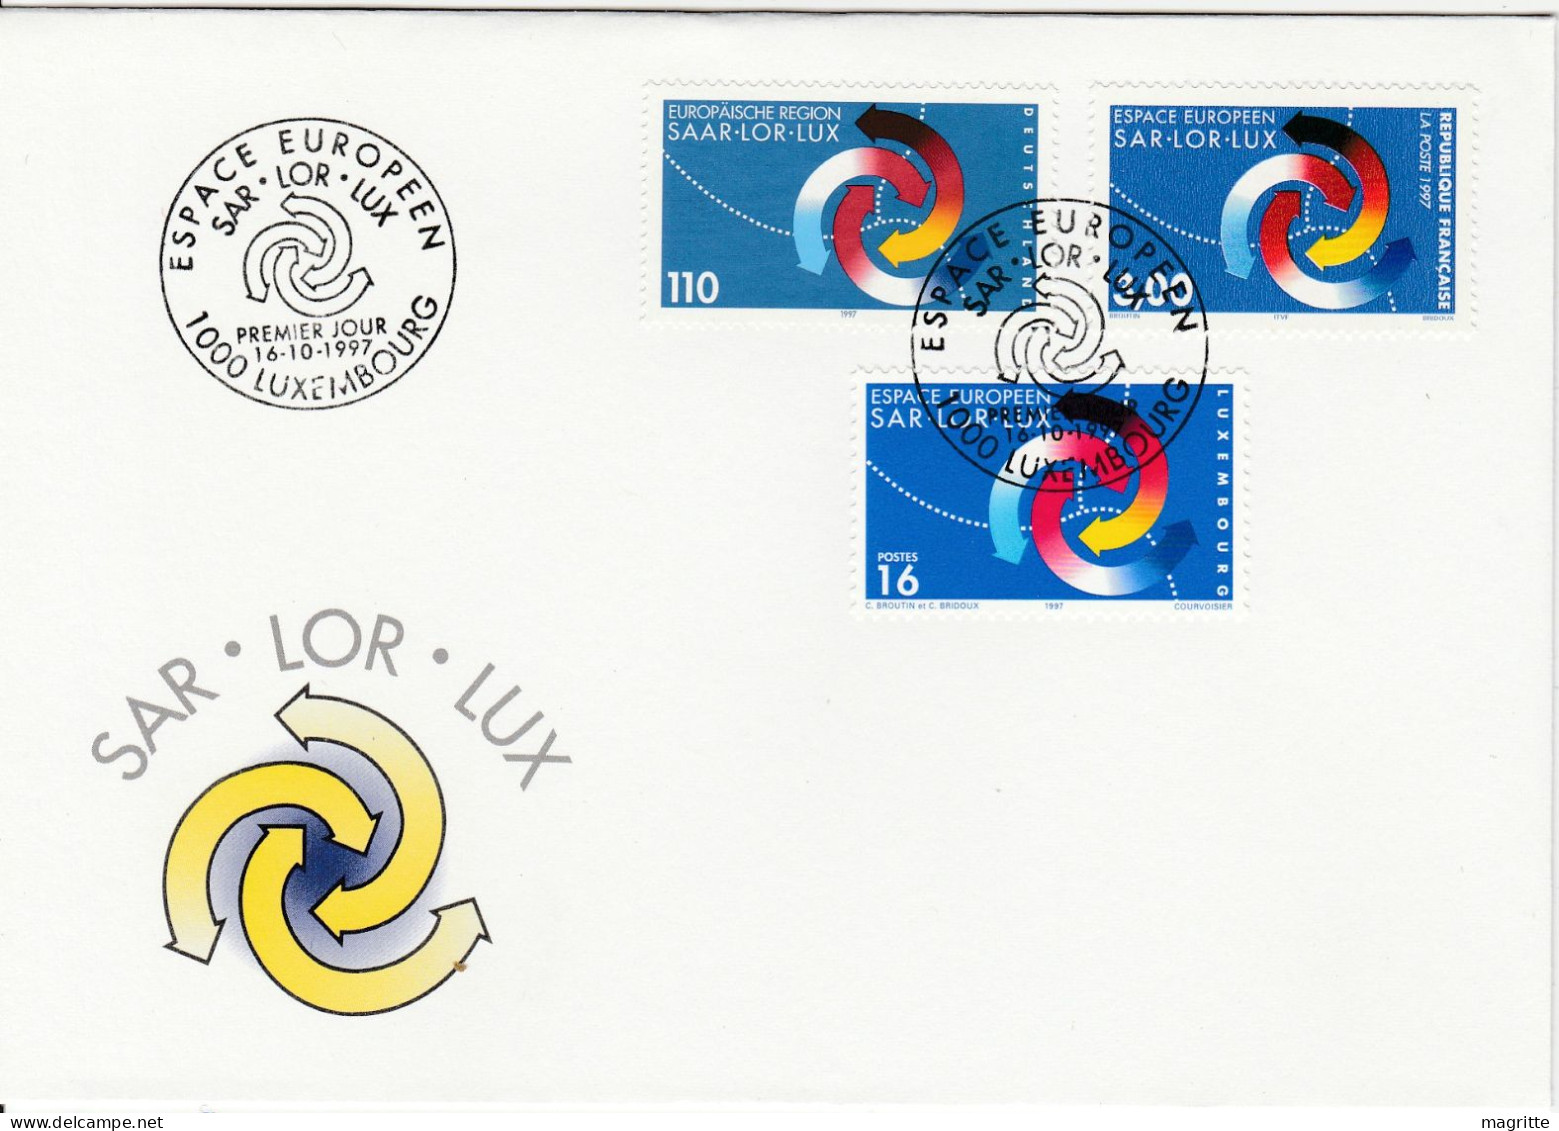 France Allemagne Luxembourg 1997 FDC Mixte Emission Commune Sar-Lor-Lux Germany Luxembourg Saar Lor Lux Joint Issue - Gemeinschaftsausgaben